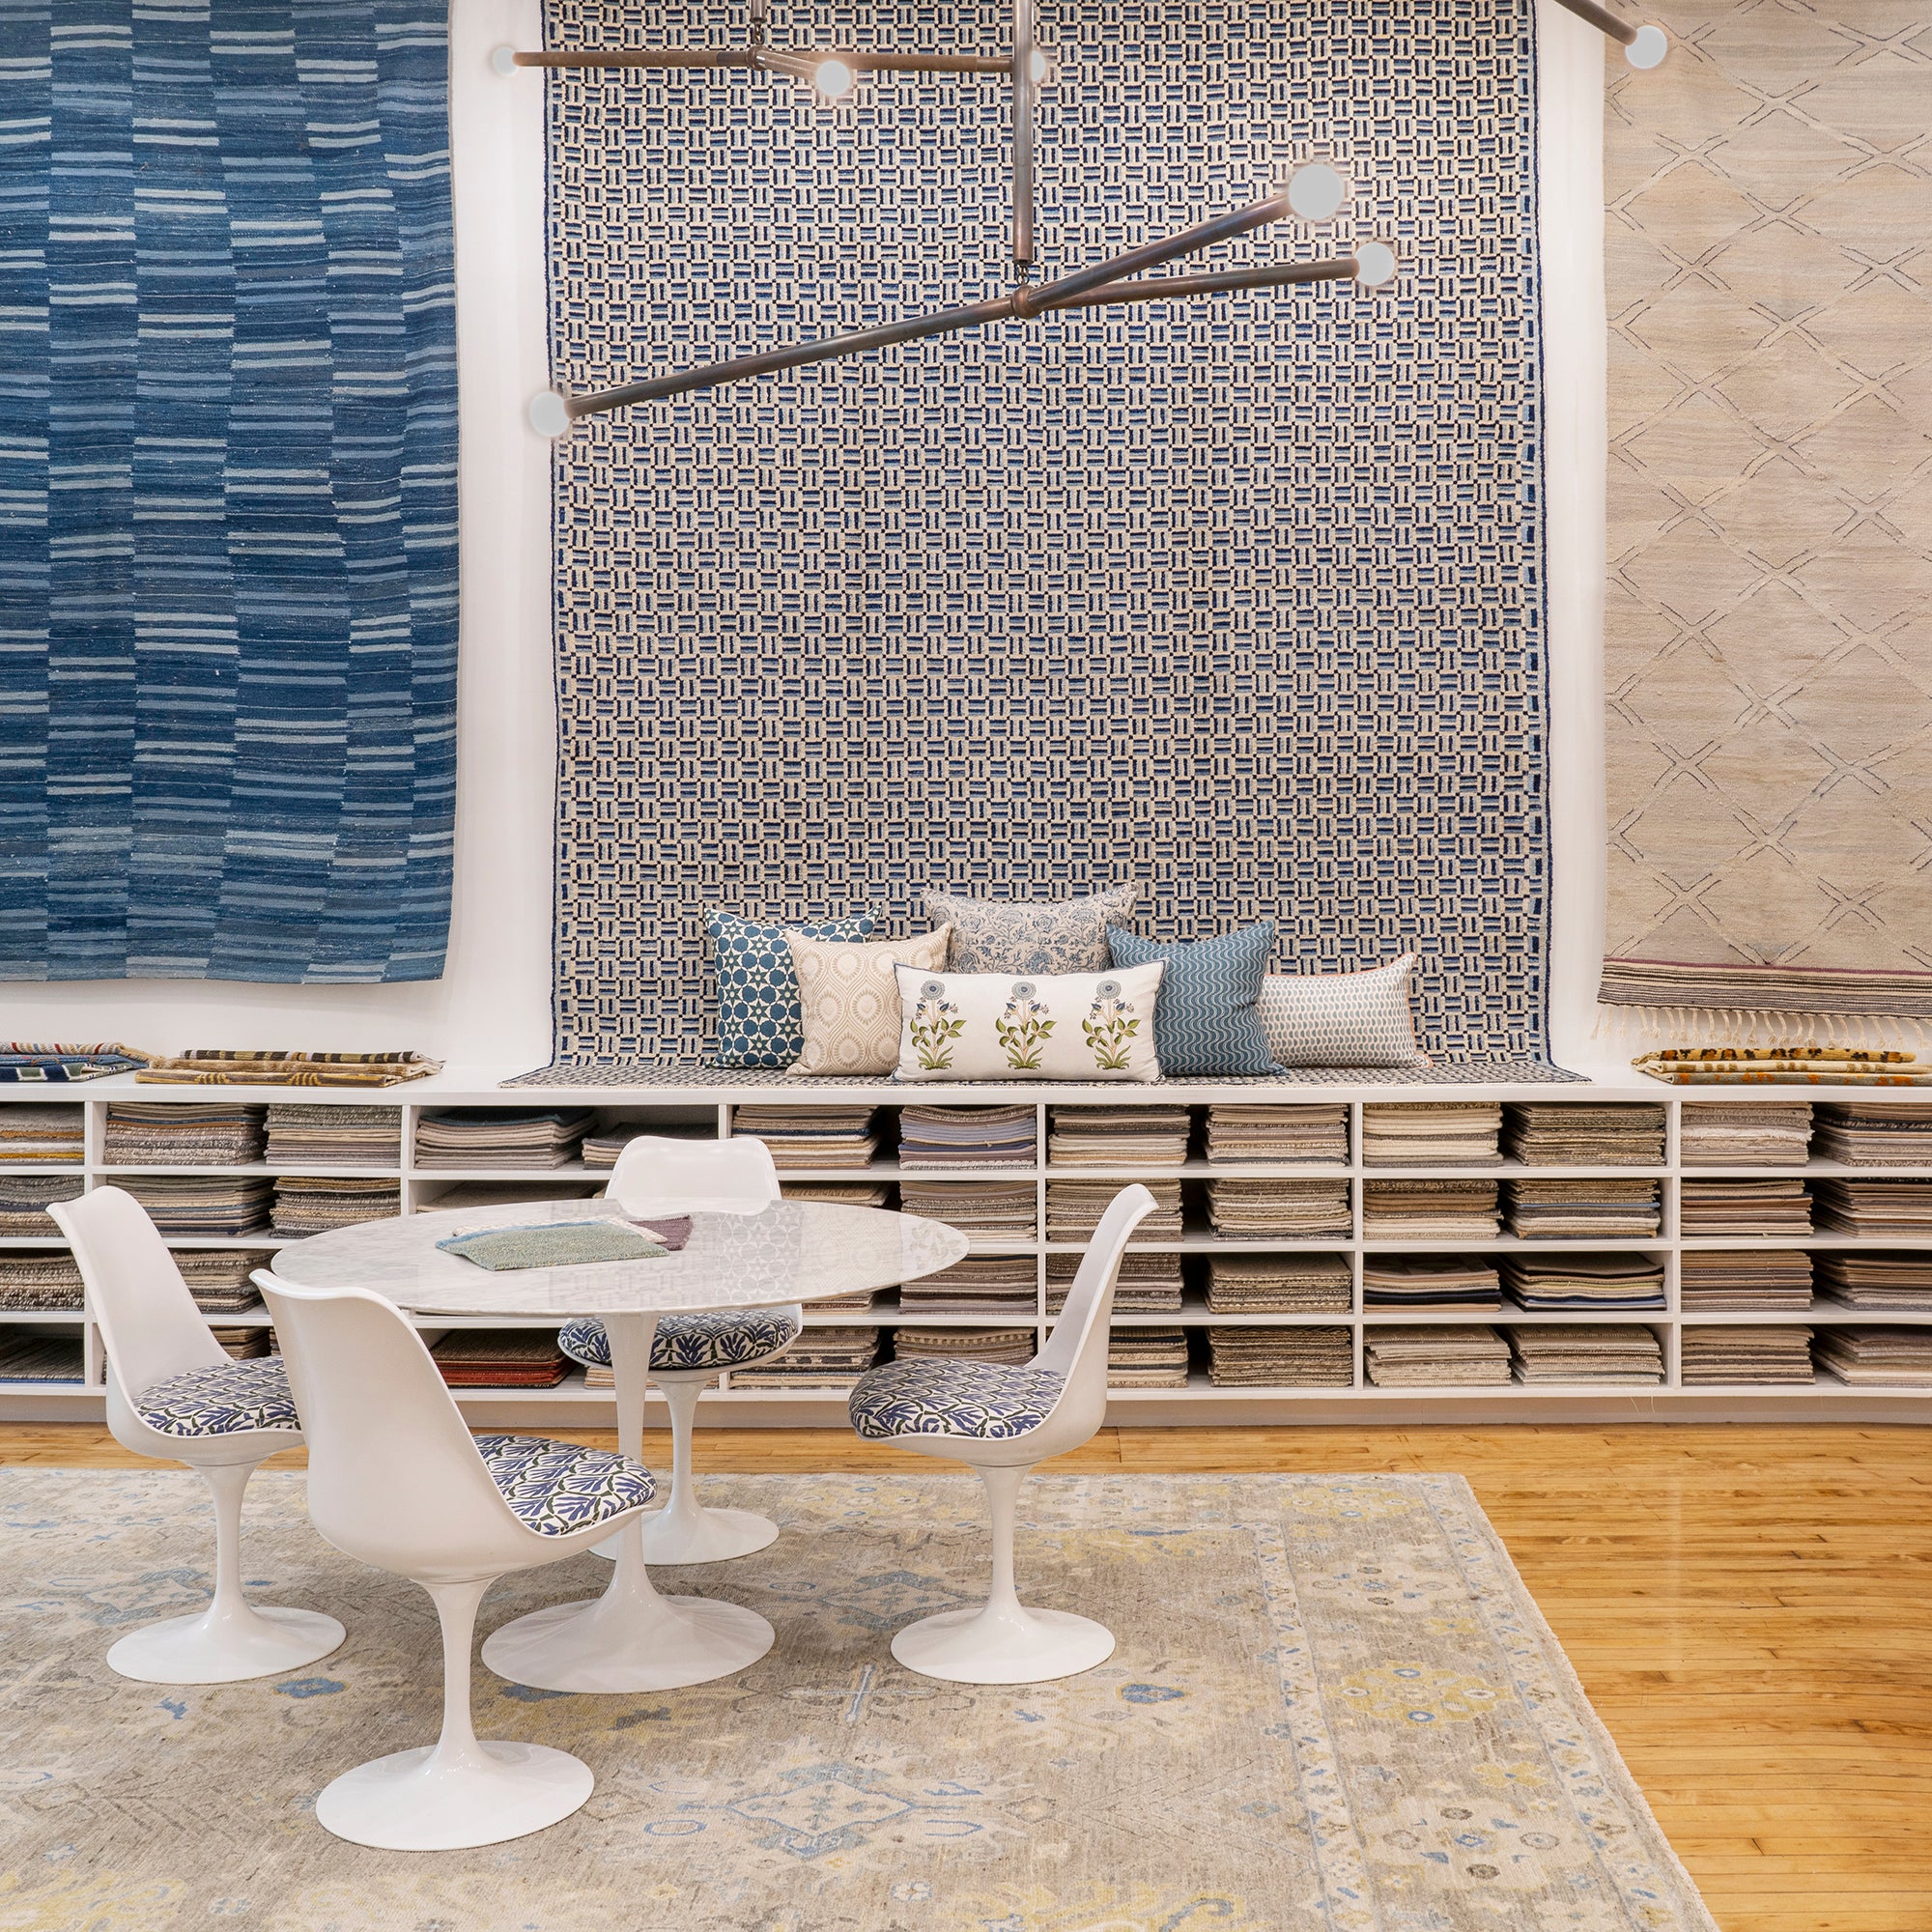 An image of the Studio Four NY Showroom, a white table with four chairs in font of white shelving with rug samples, a display of several pillows against three rugs hanging on the wall. 